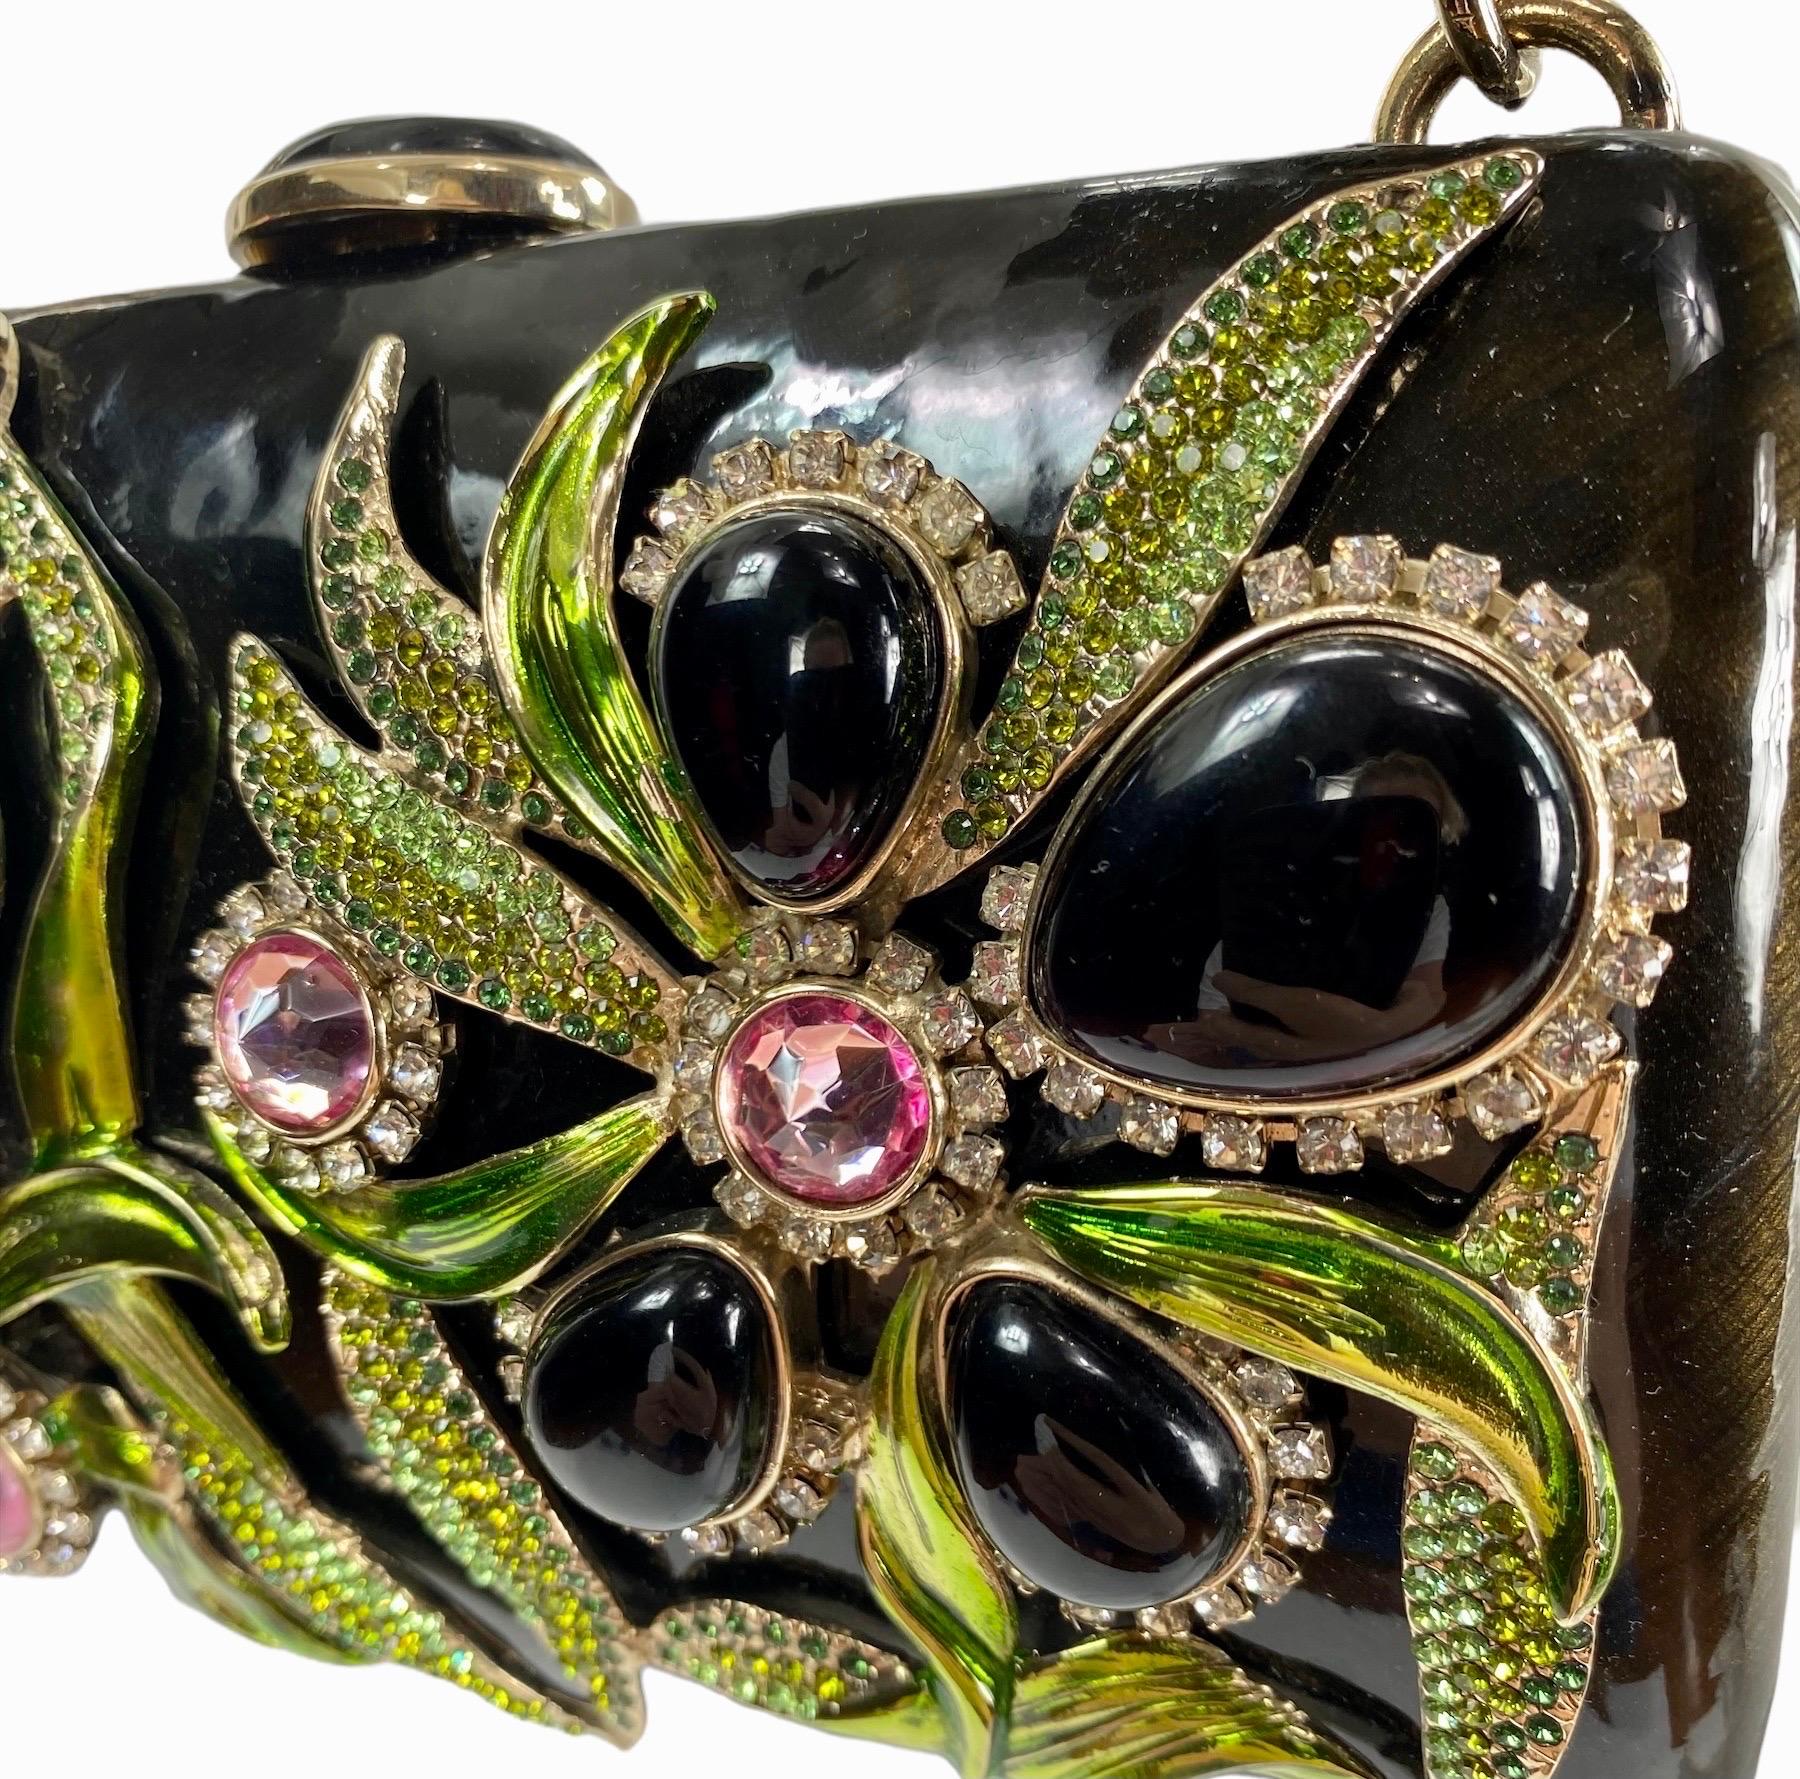 Tom Ford for Yves Saint Laurent Rive Gauche S/S 2004 Enamel Jeweled Clutch Bag For Sale 1